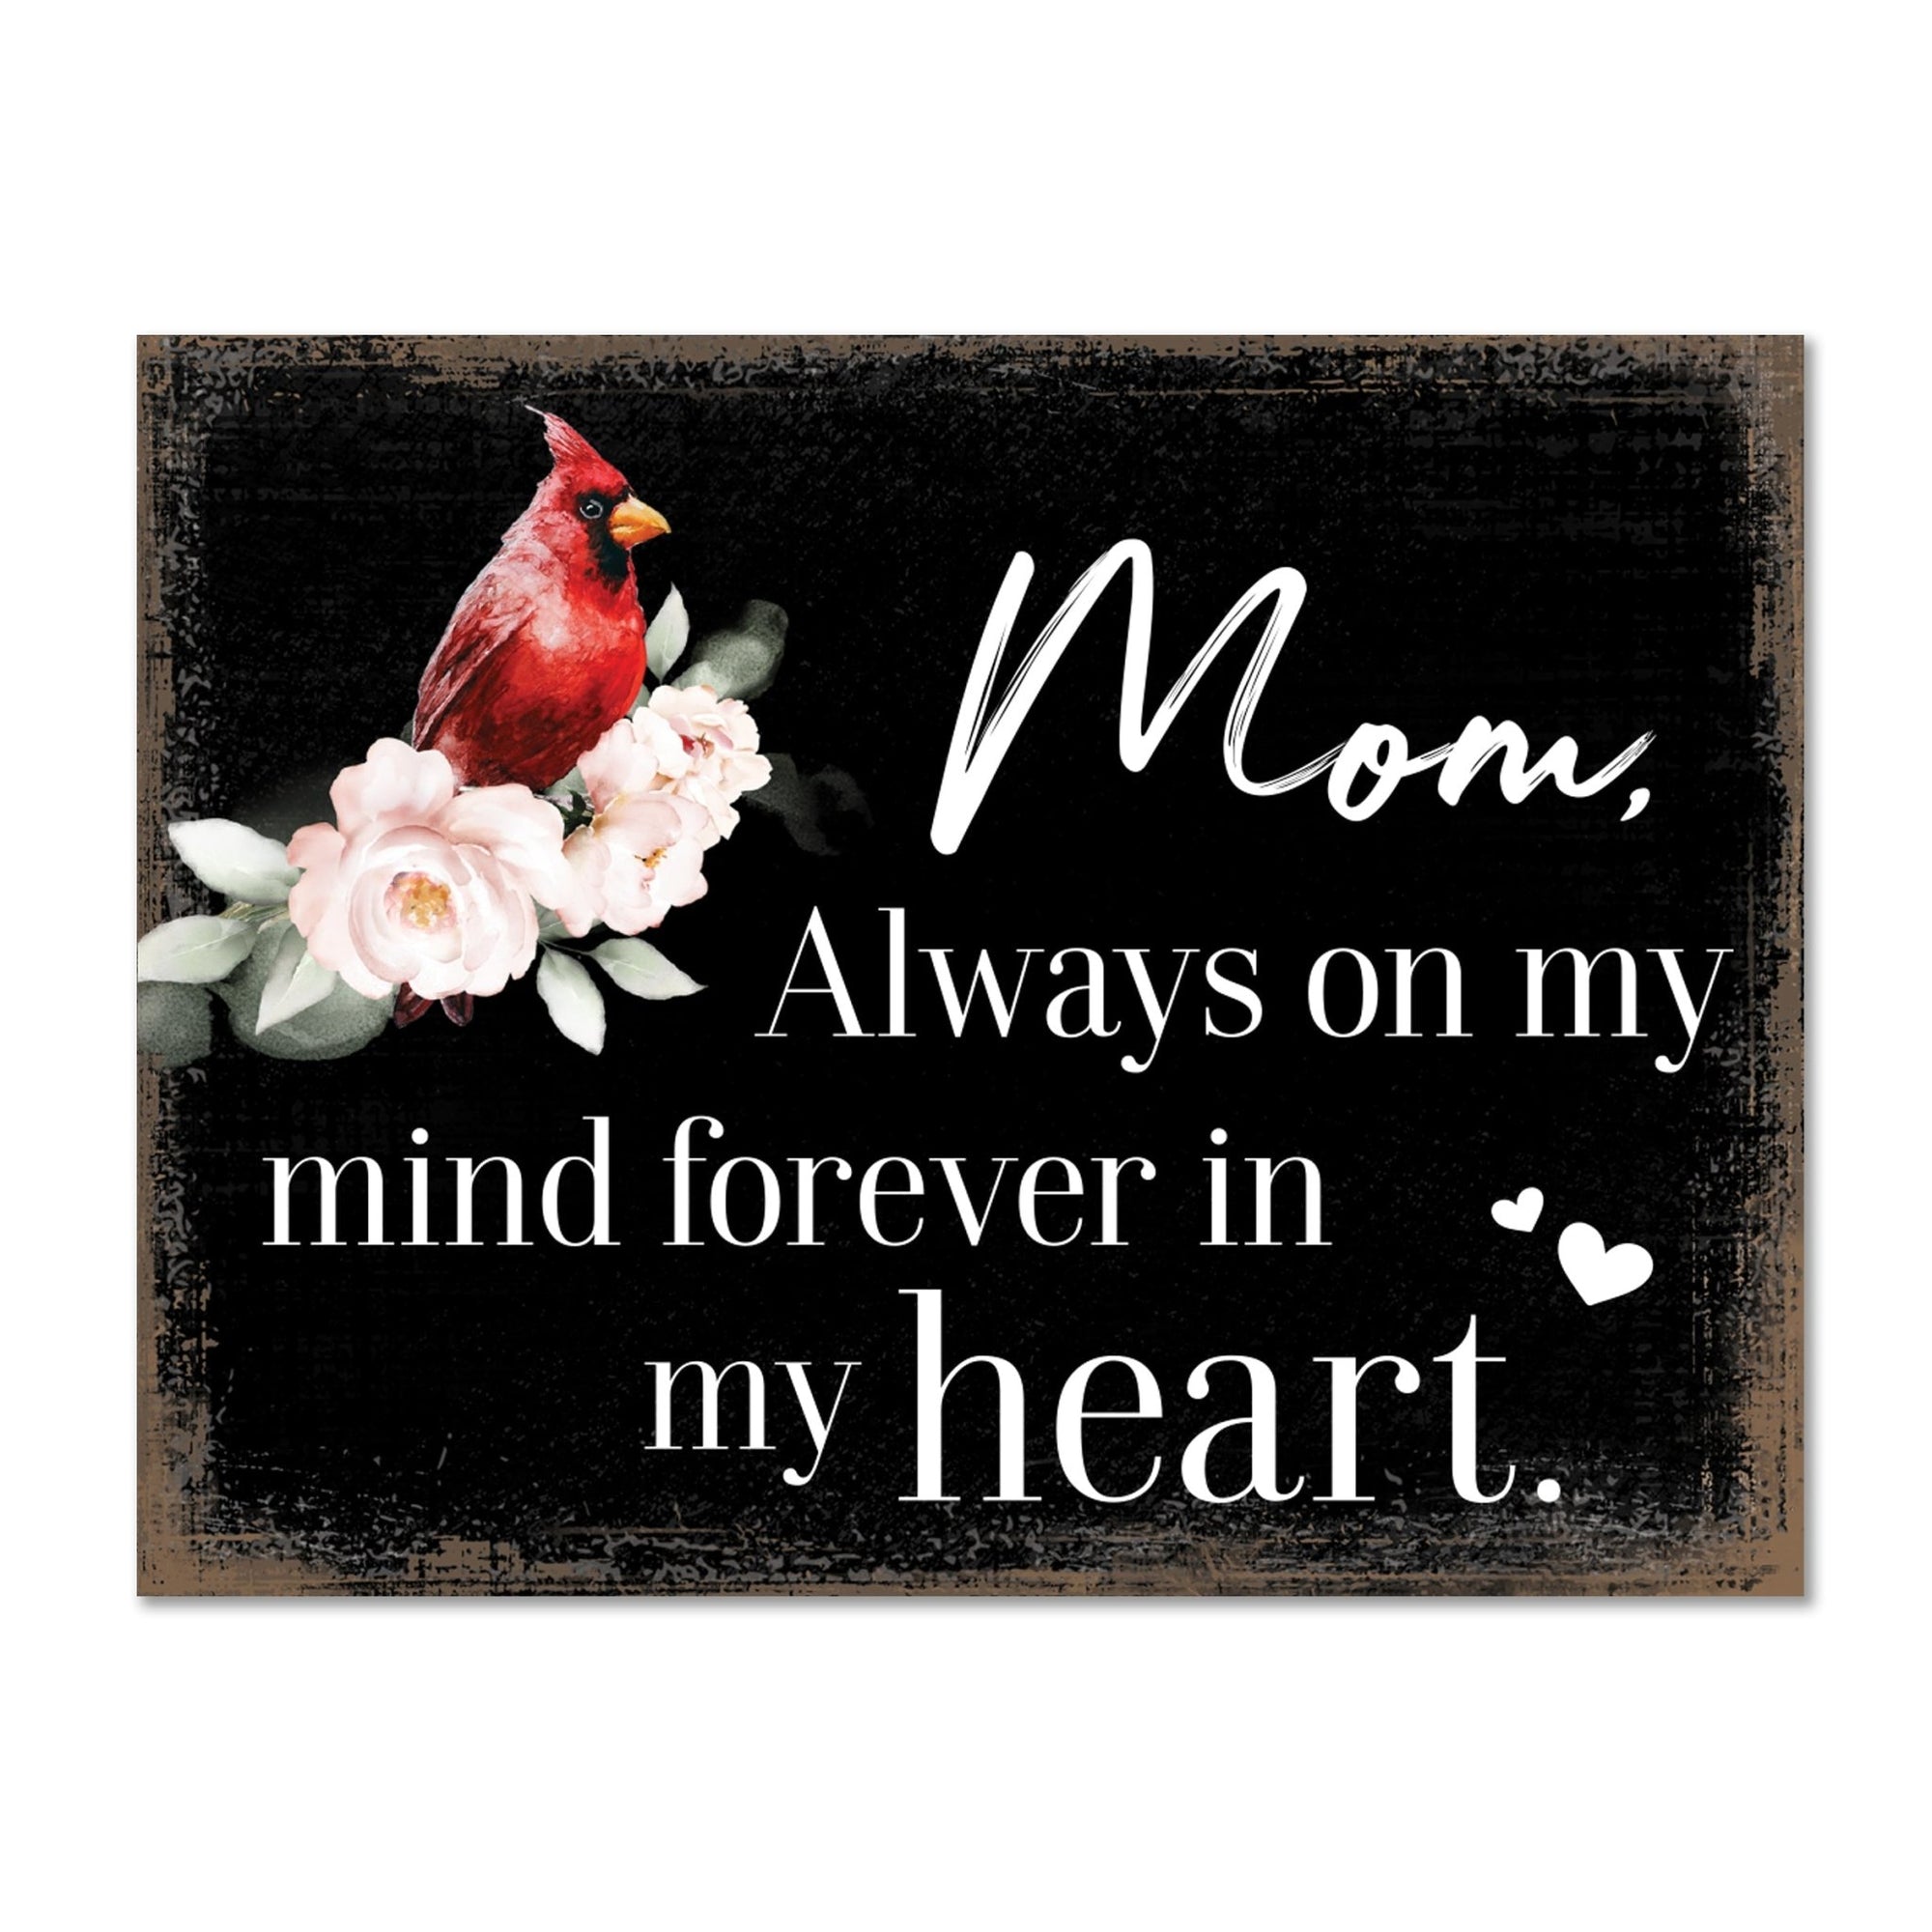 A cardinal magnet that serves as a lasting memorial decoration, offering comfort and solace.